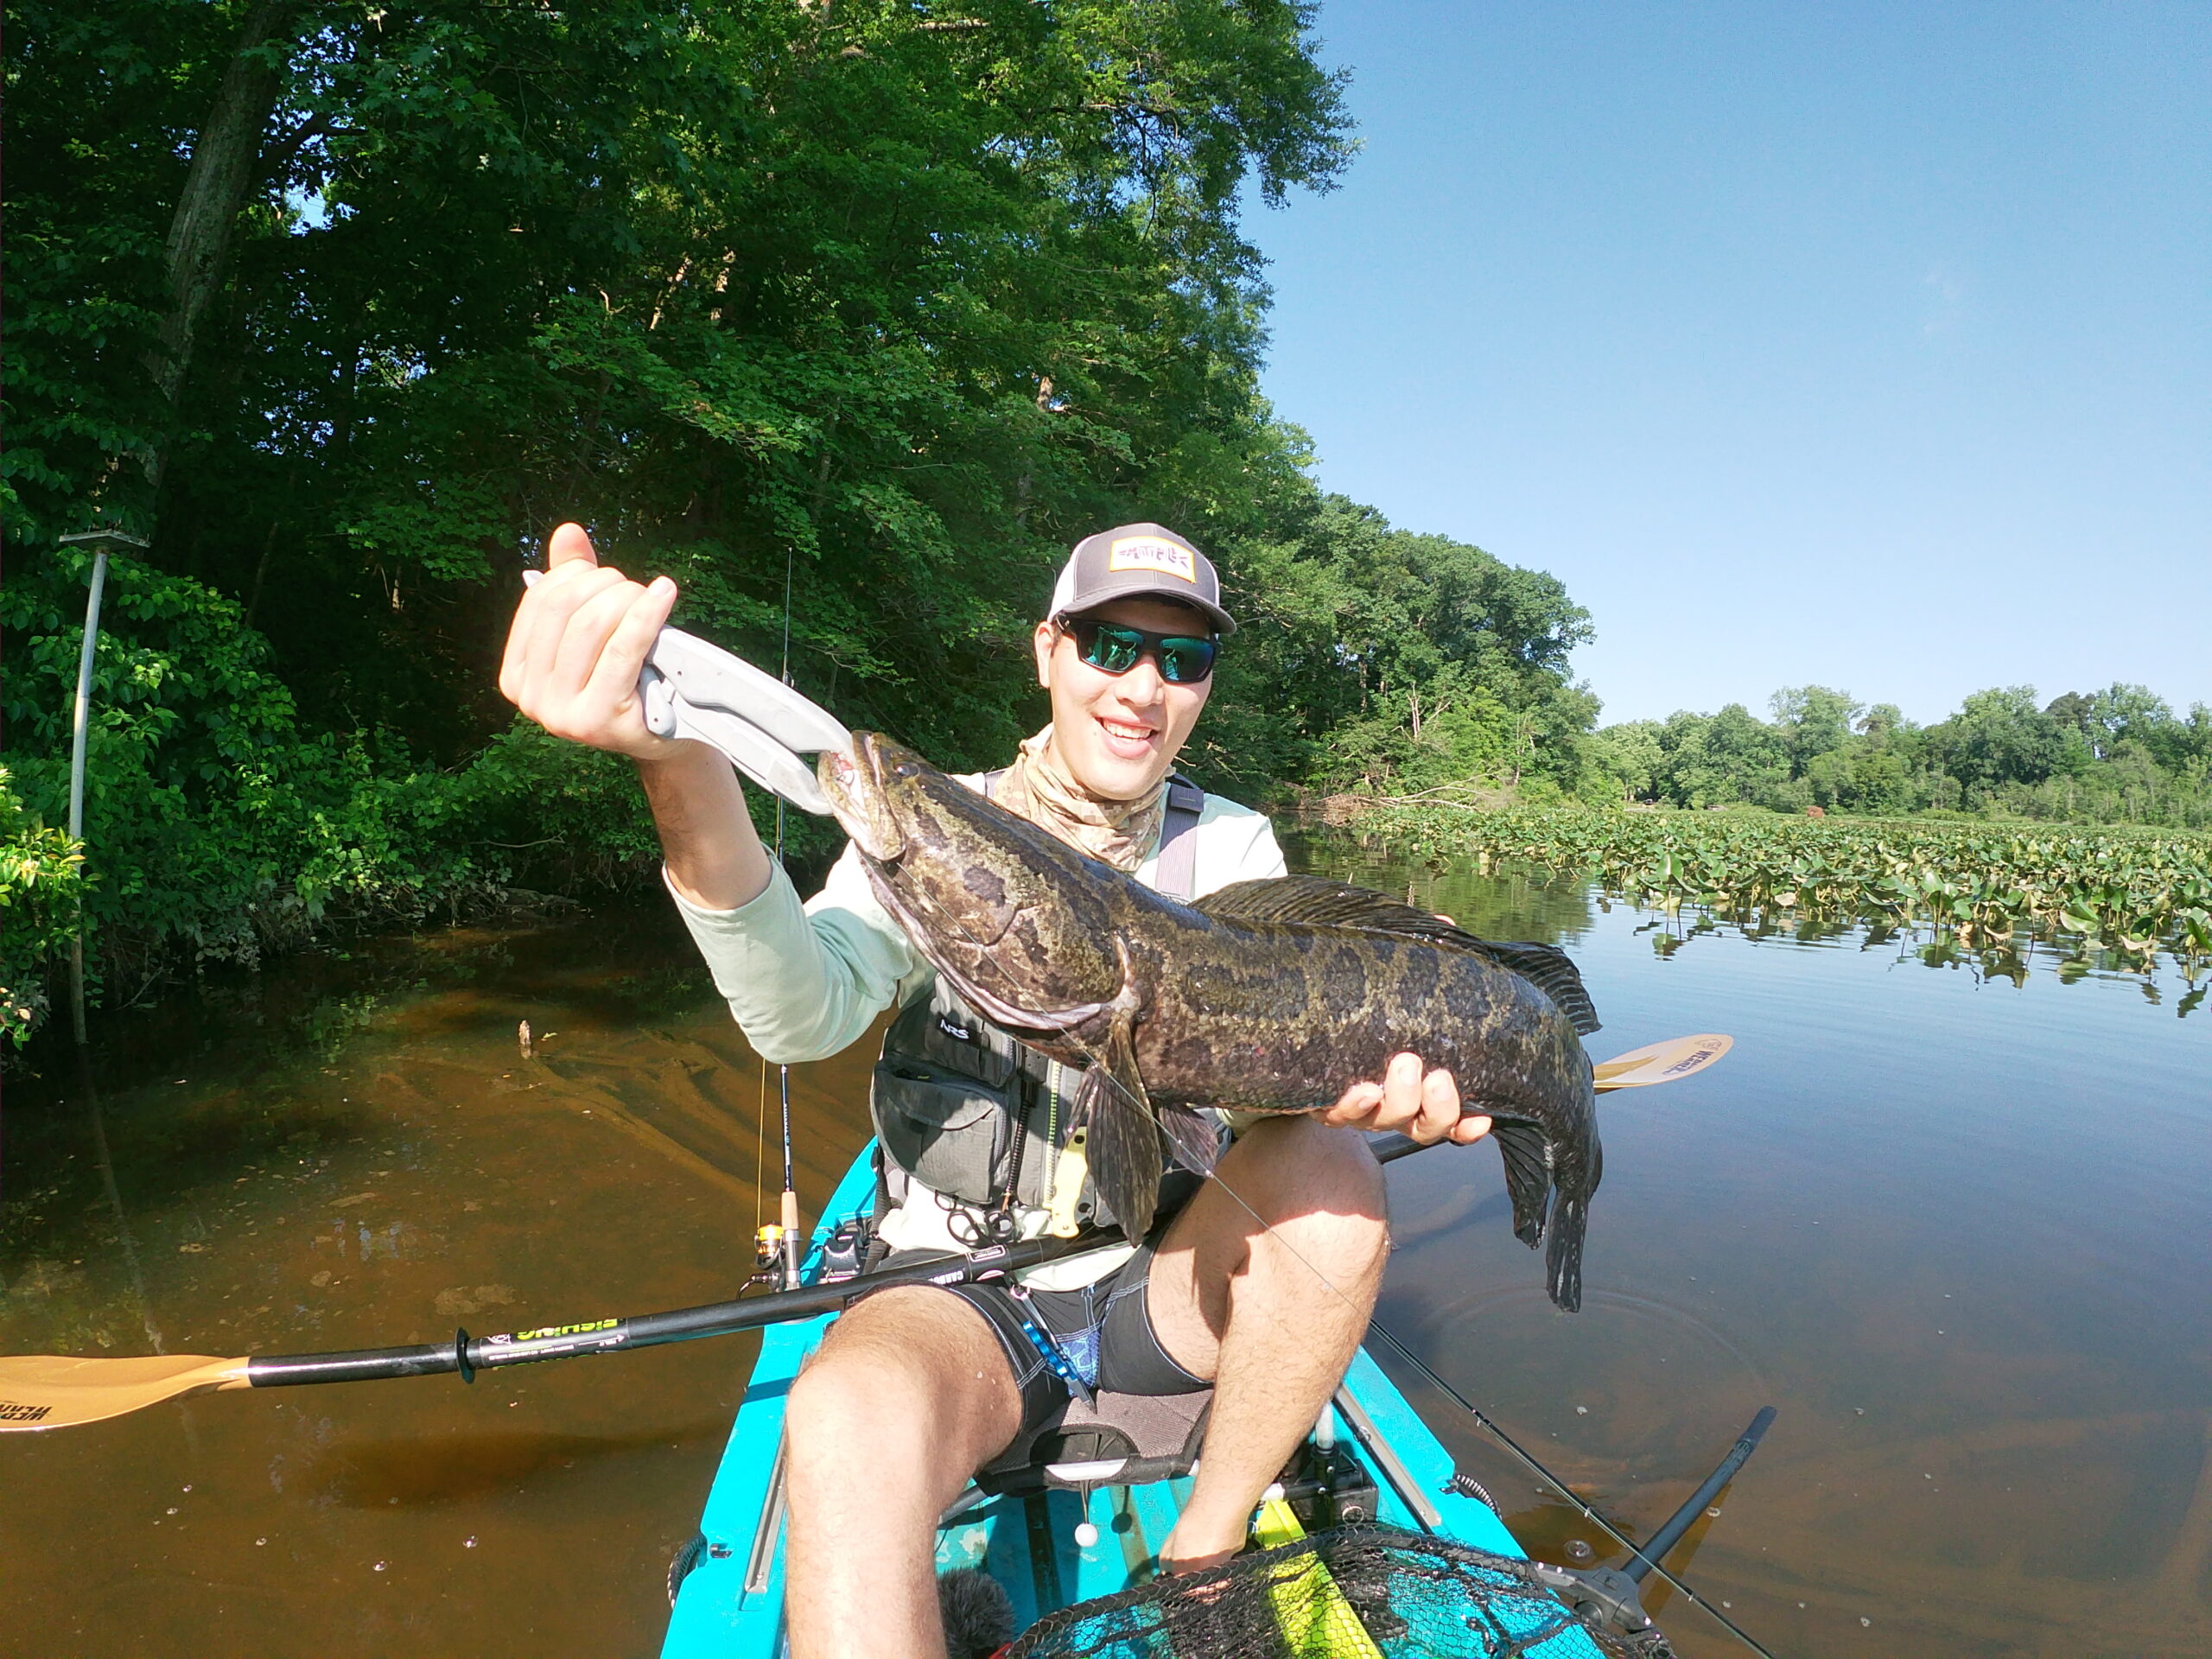 There are a lot of misconceptions about snakeheads but the science says they aren't fish-eating monsters